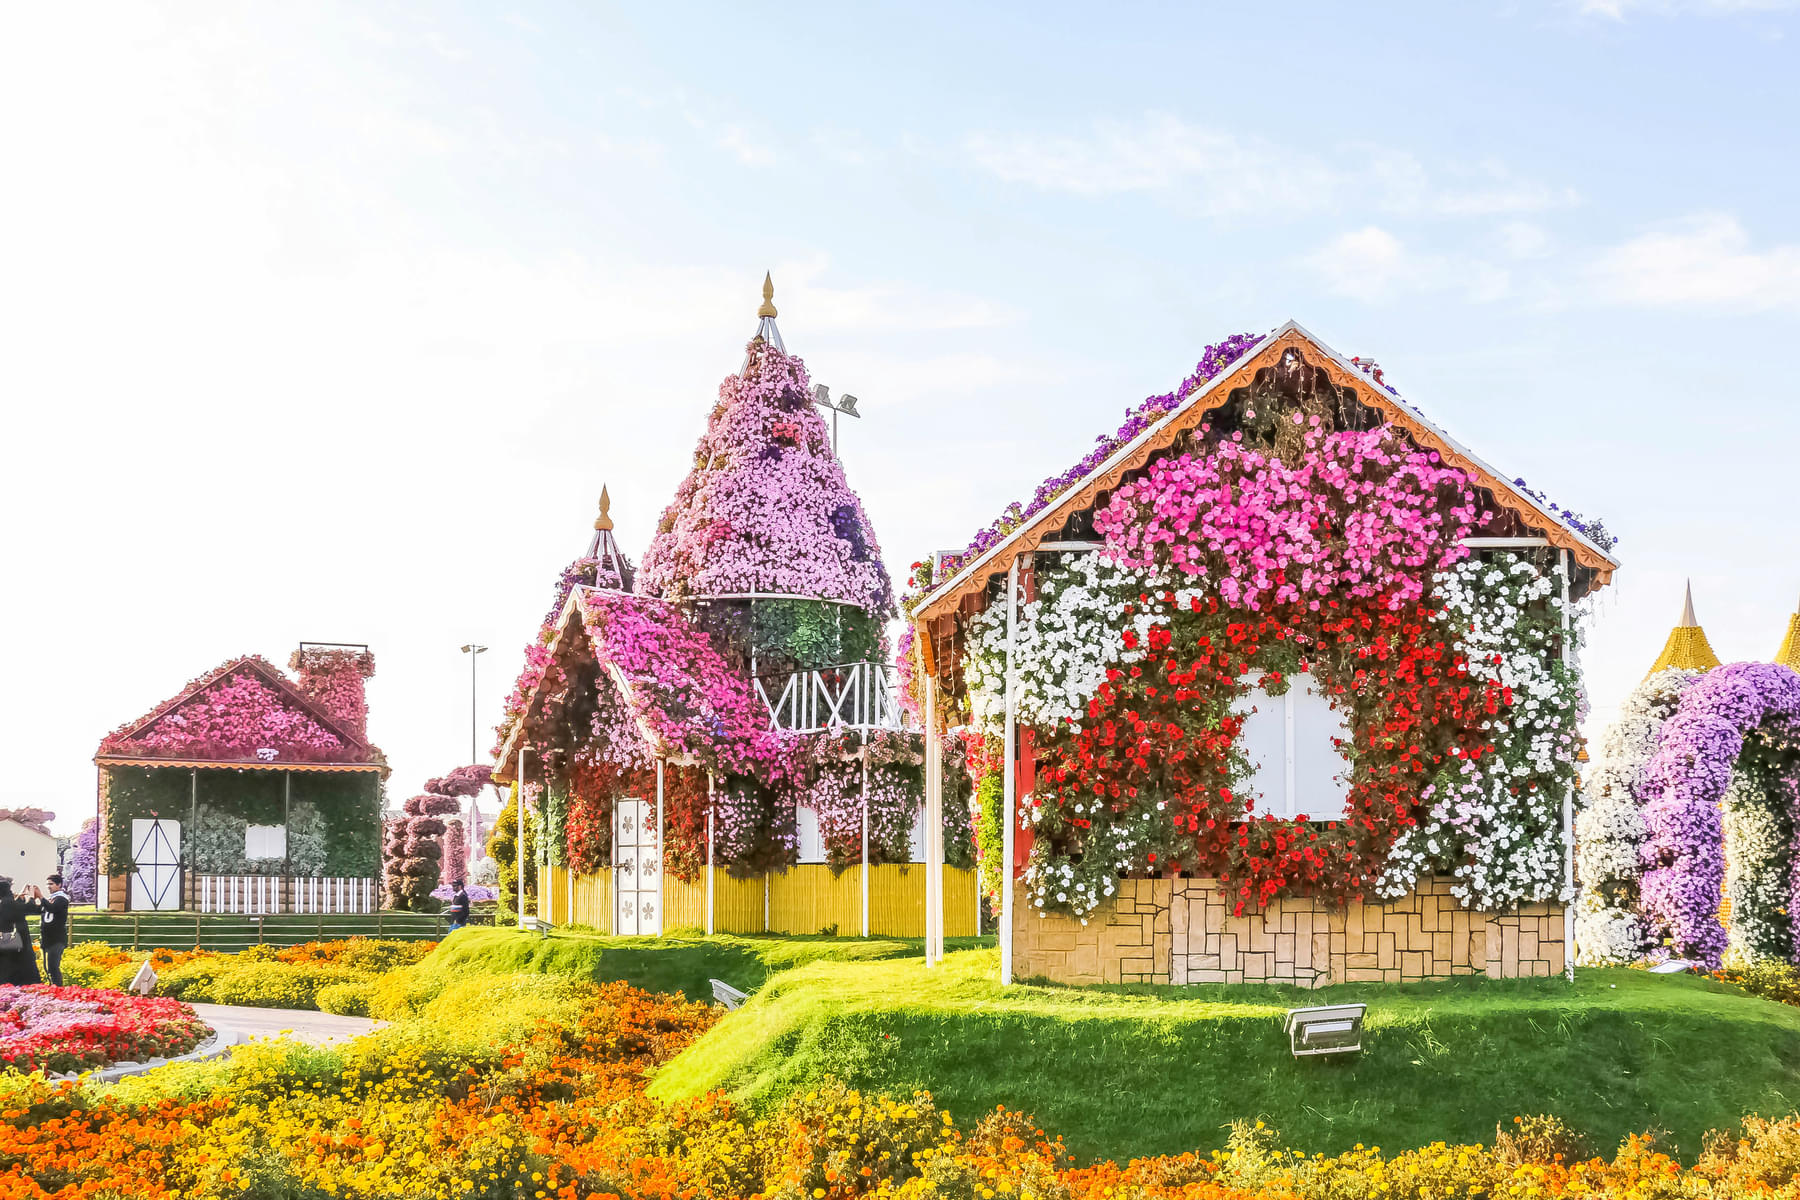 Be awe-inspired by the enchanting Floral Villas nestled within the scenic beauty of Lake Park.